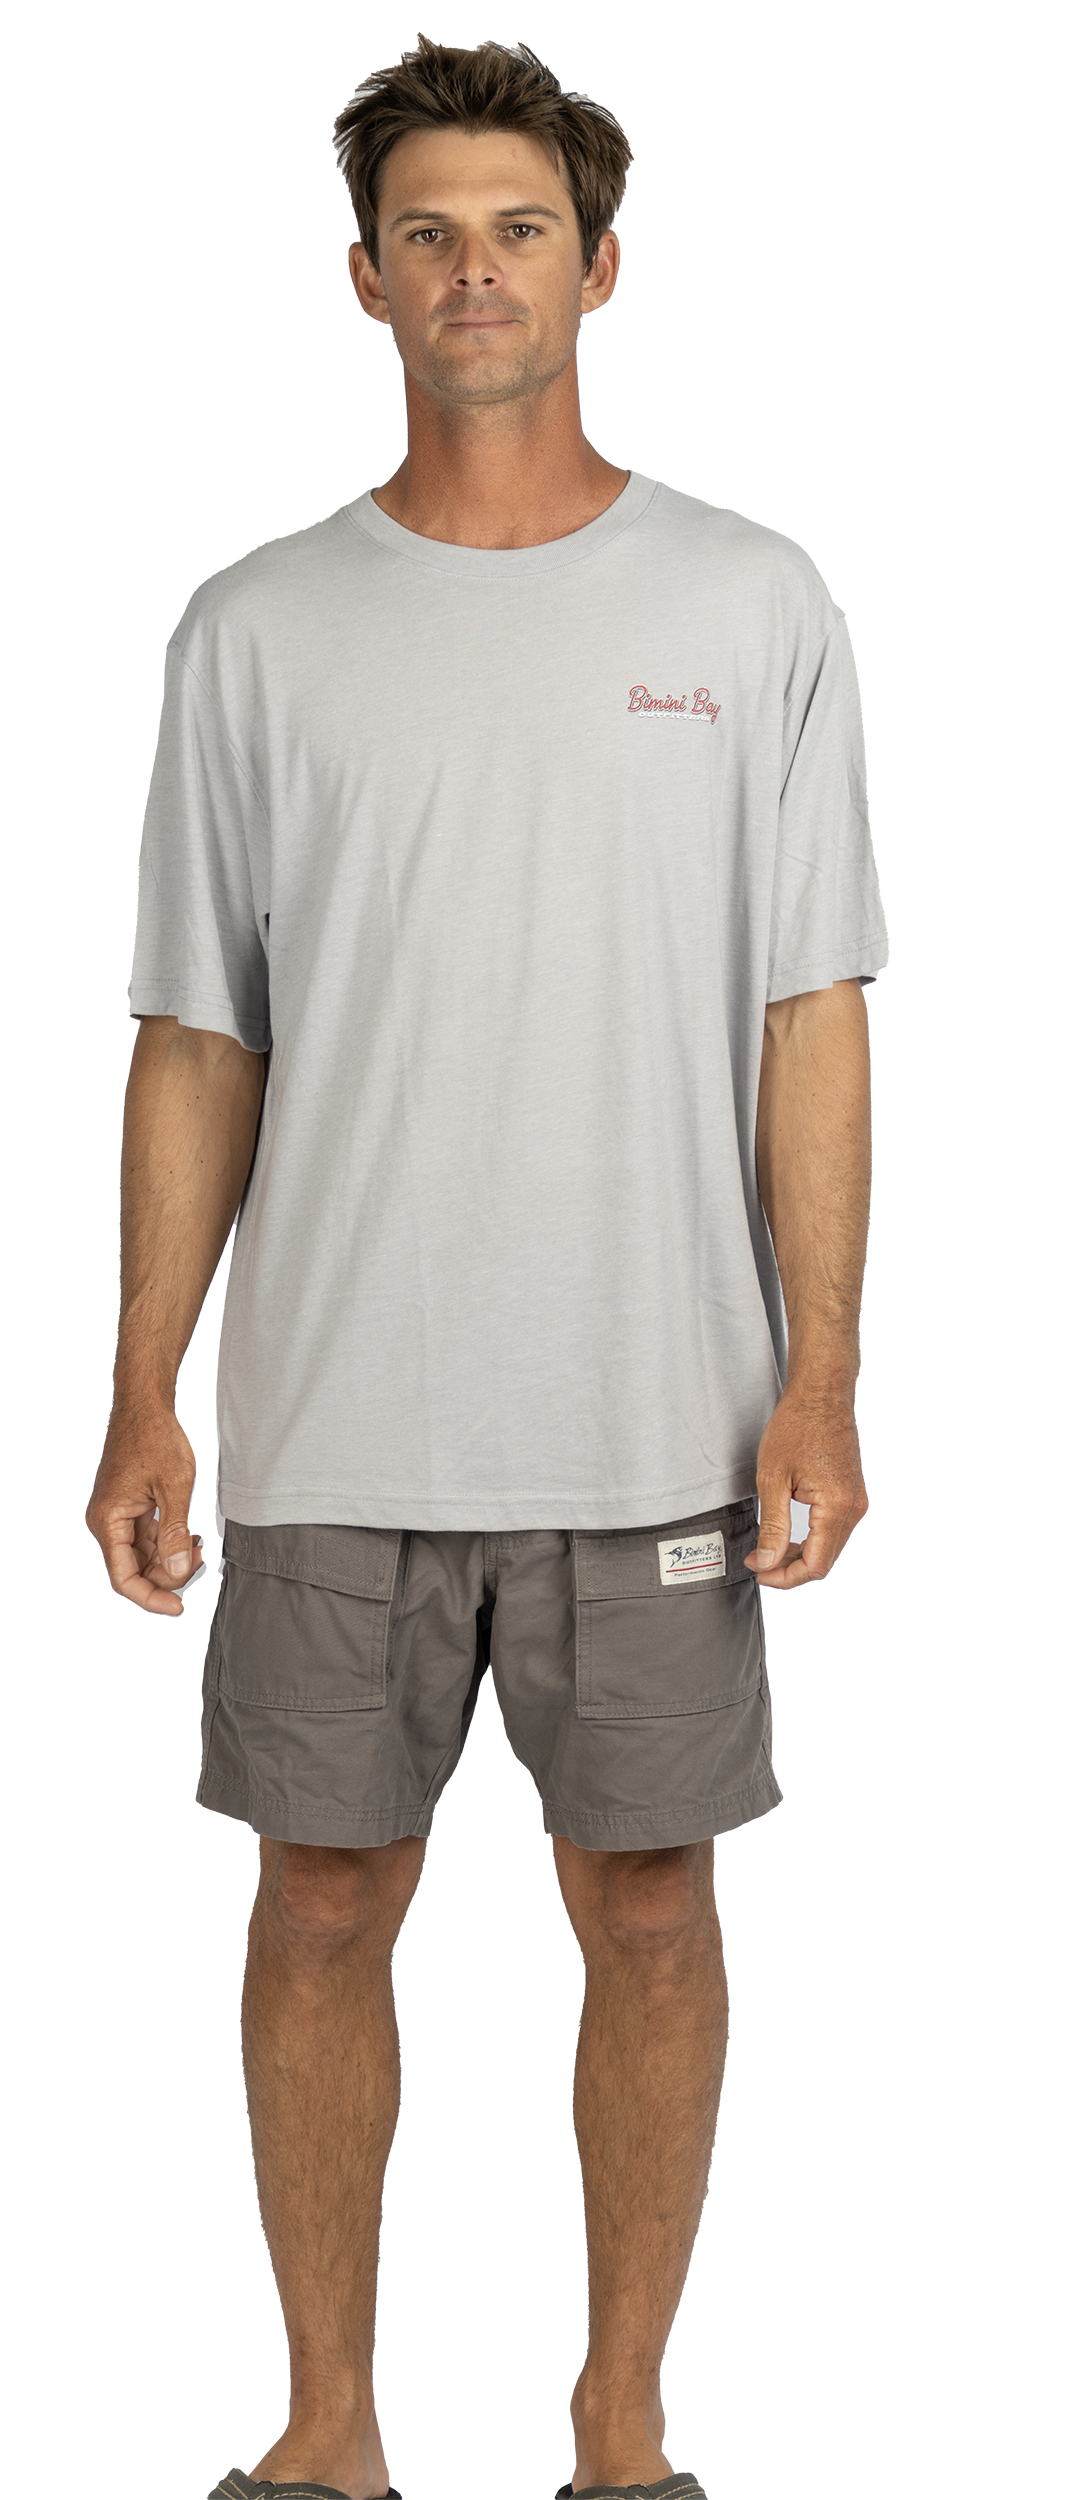 Classic Outfitters Short Sleeve Graphic Tee - Rigged and Ready Light Gray